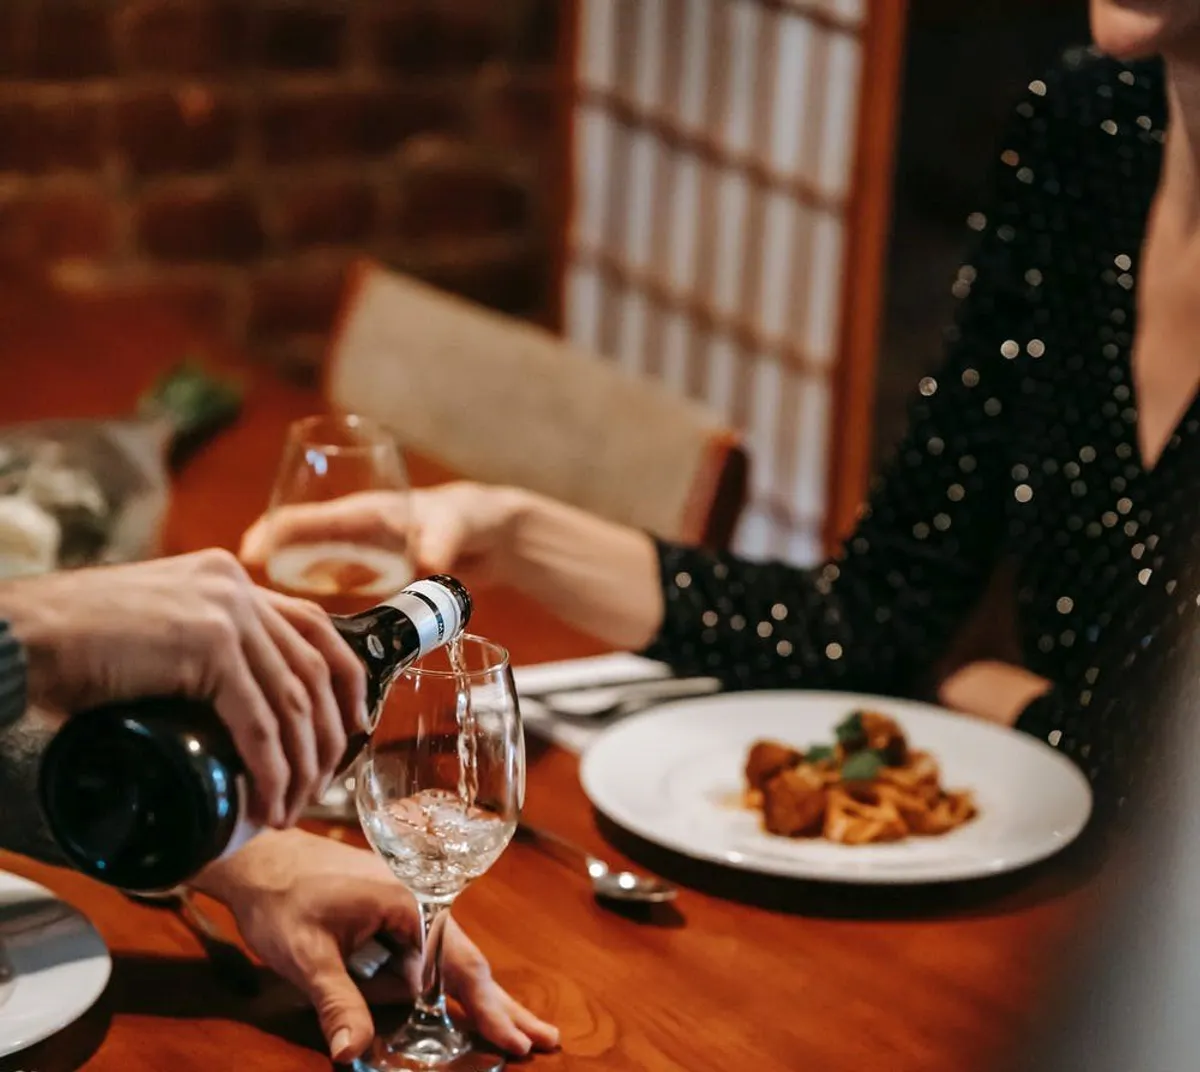 It was supposed to be a romantic dinner | Source: Pexels